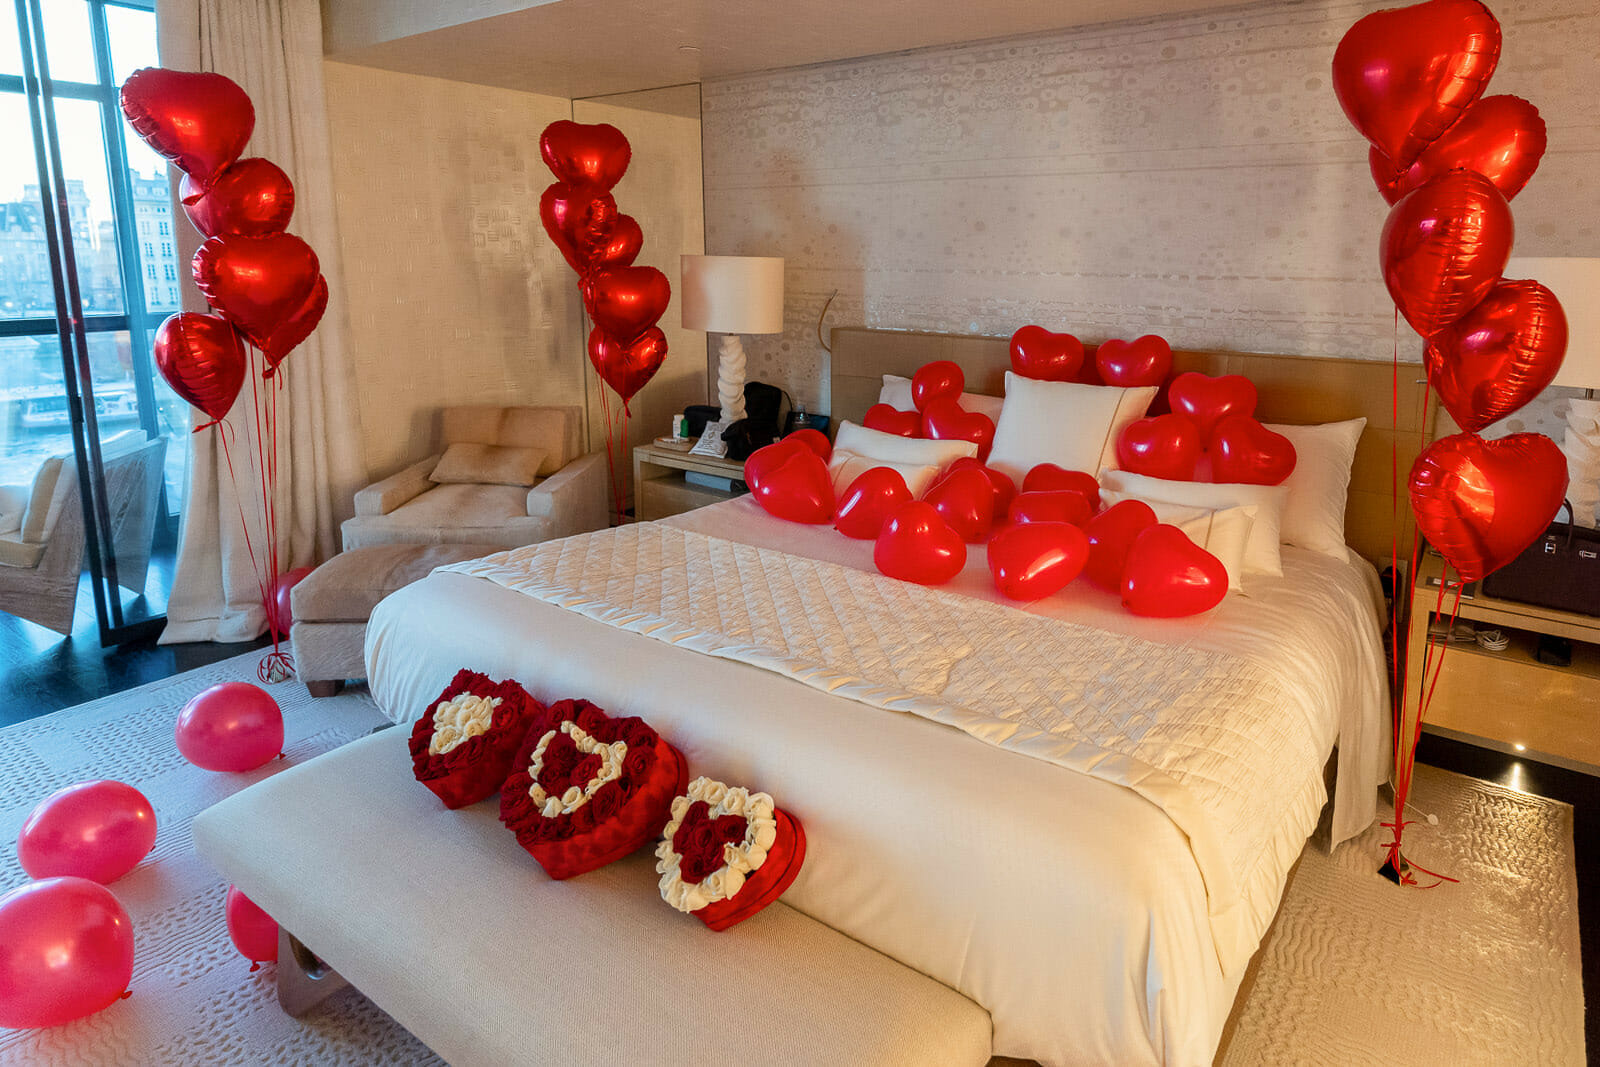 Luxury marriage proposal ideas: surprise her with amazing hotel room decorations